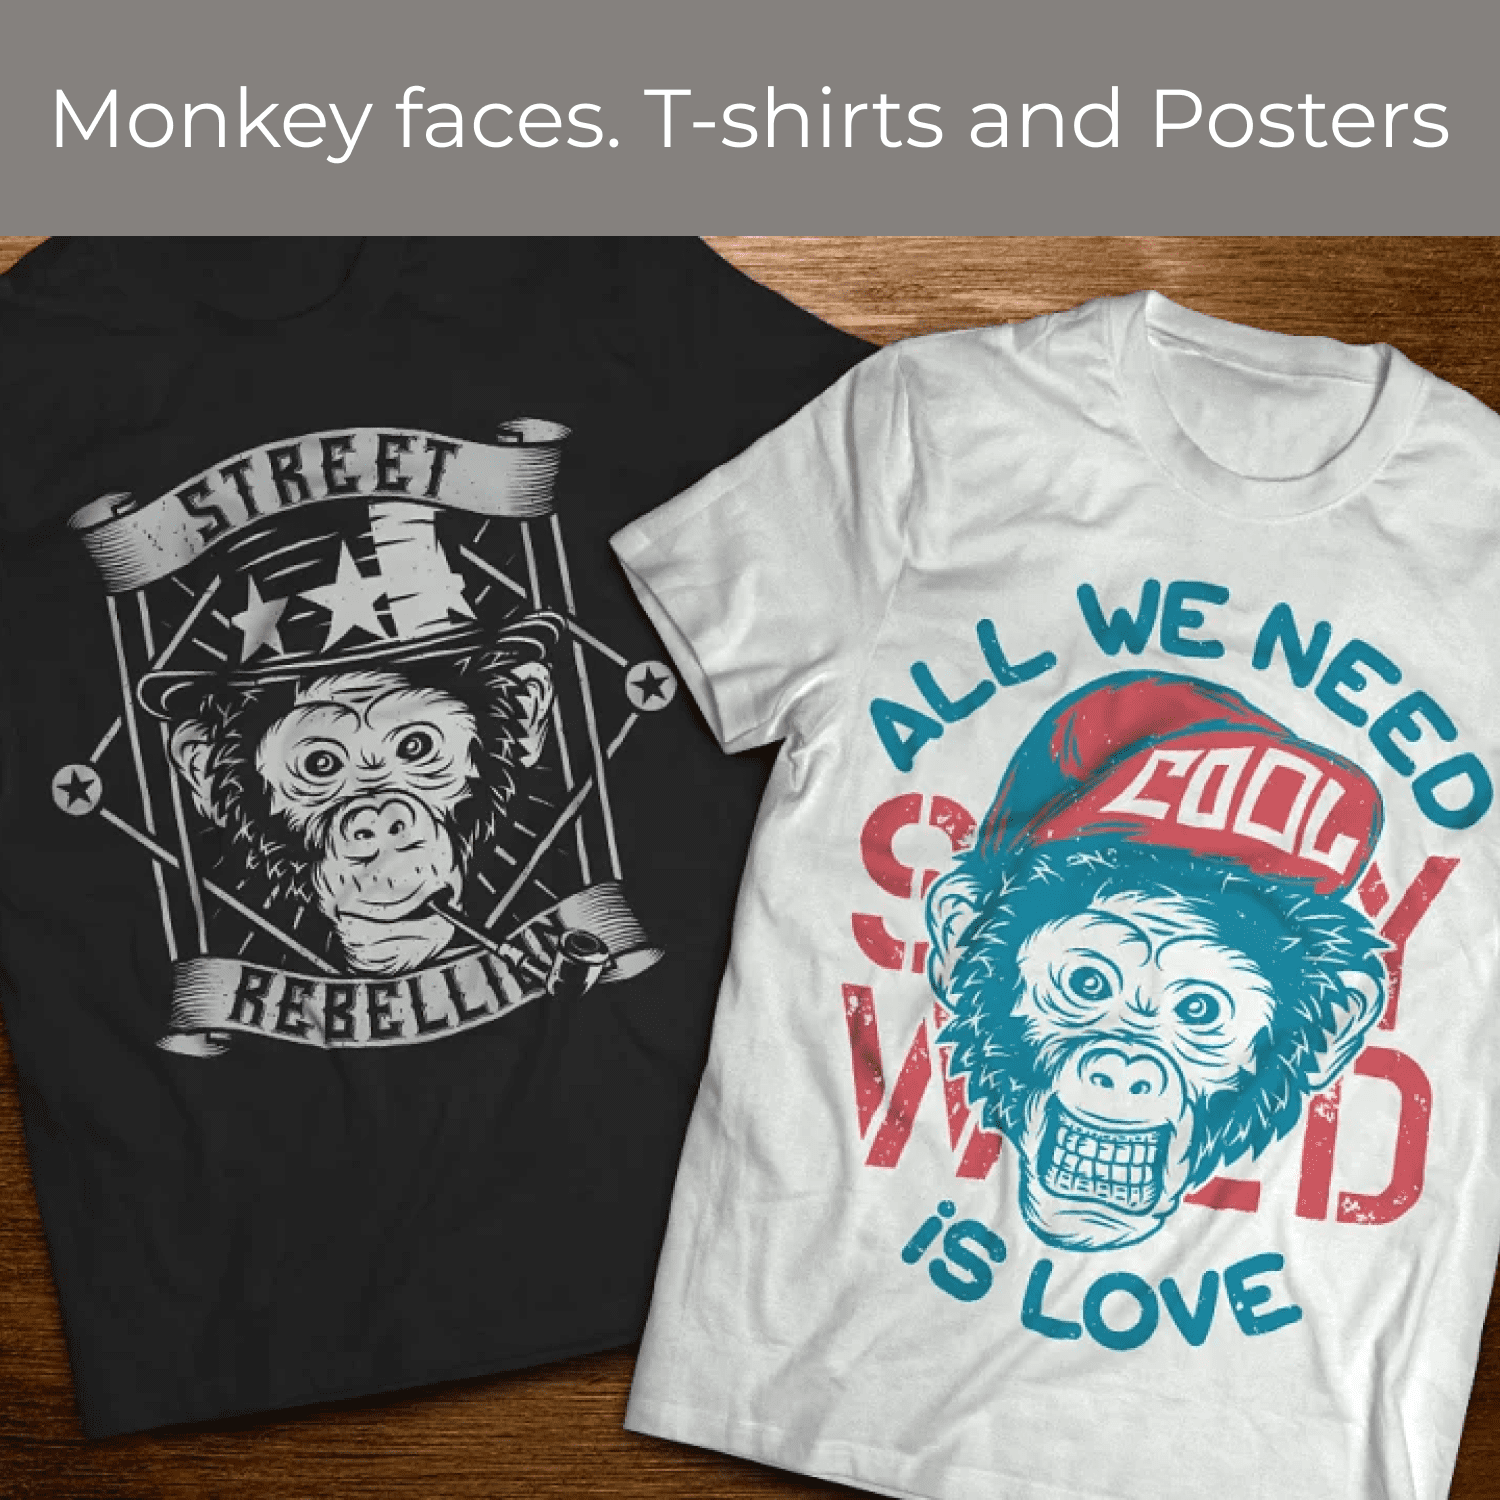 Monkey faces. T-shirts and Posters.